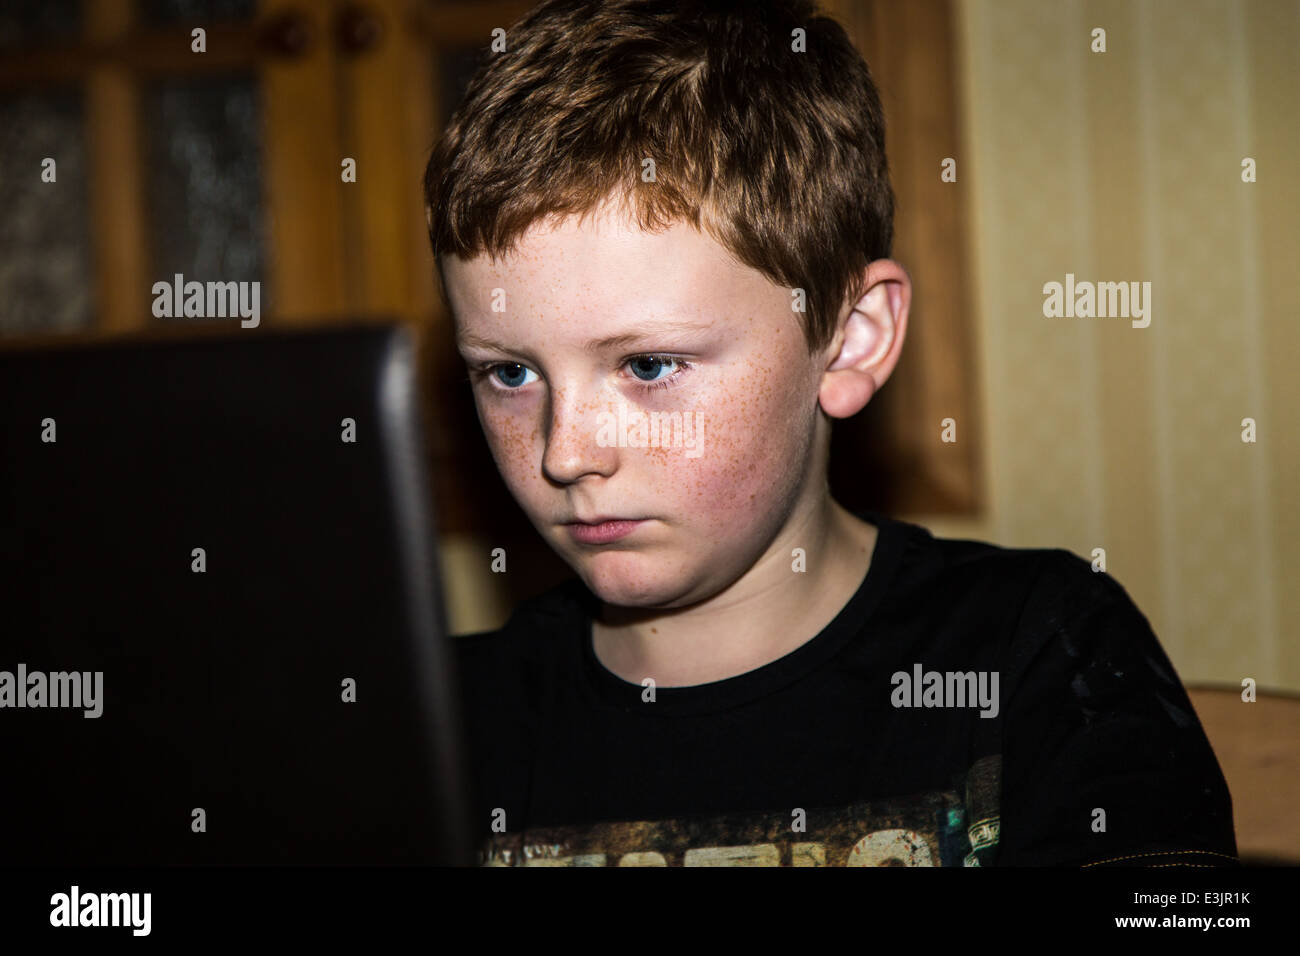 Young boy doing his homework on a computer Stock Photo